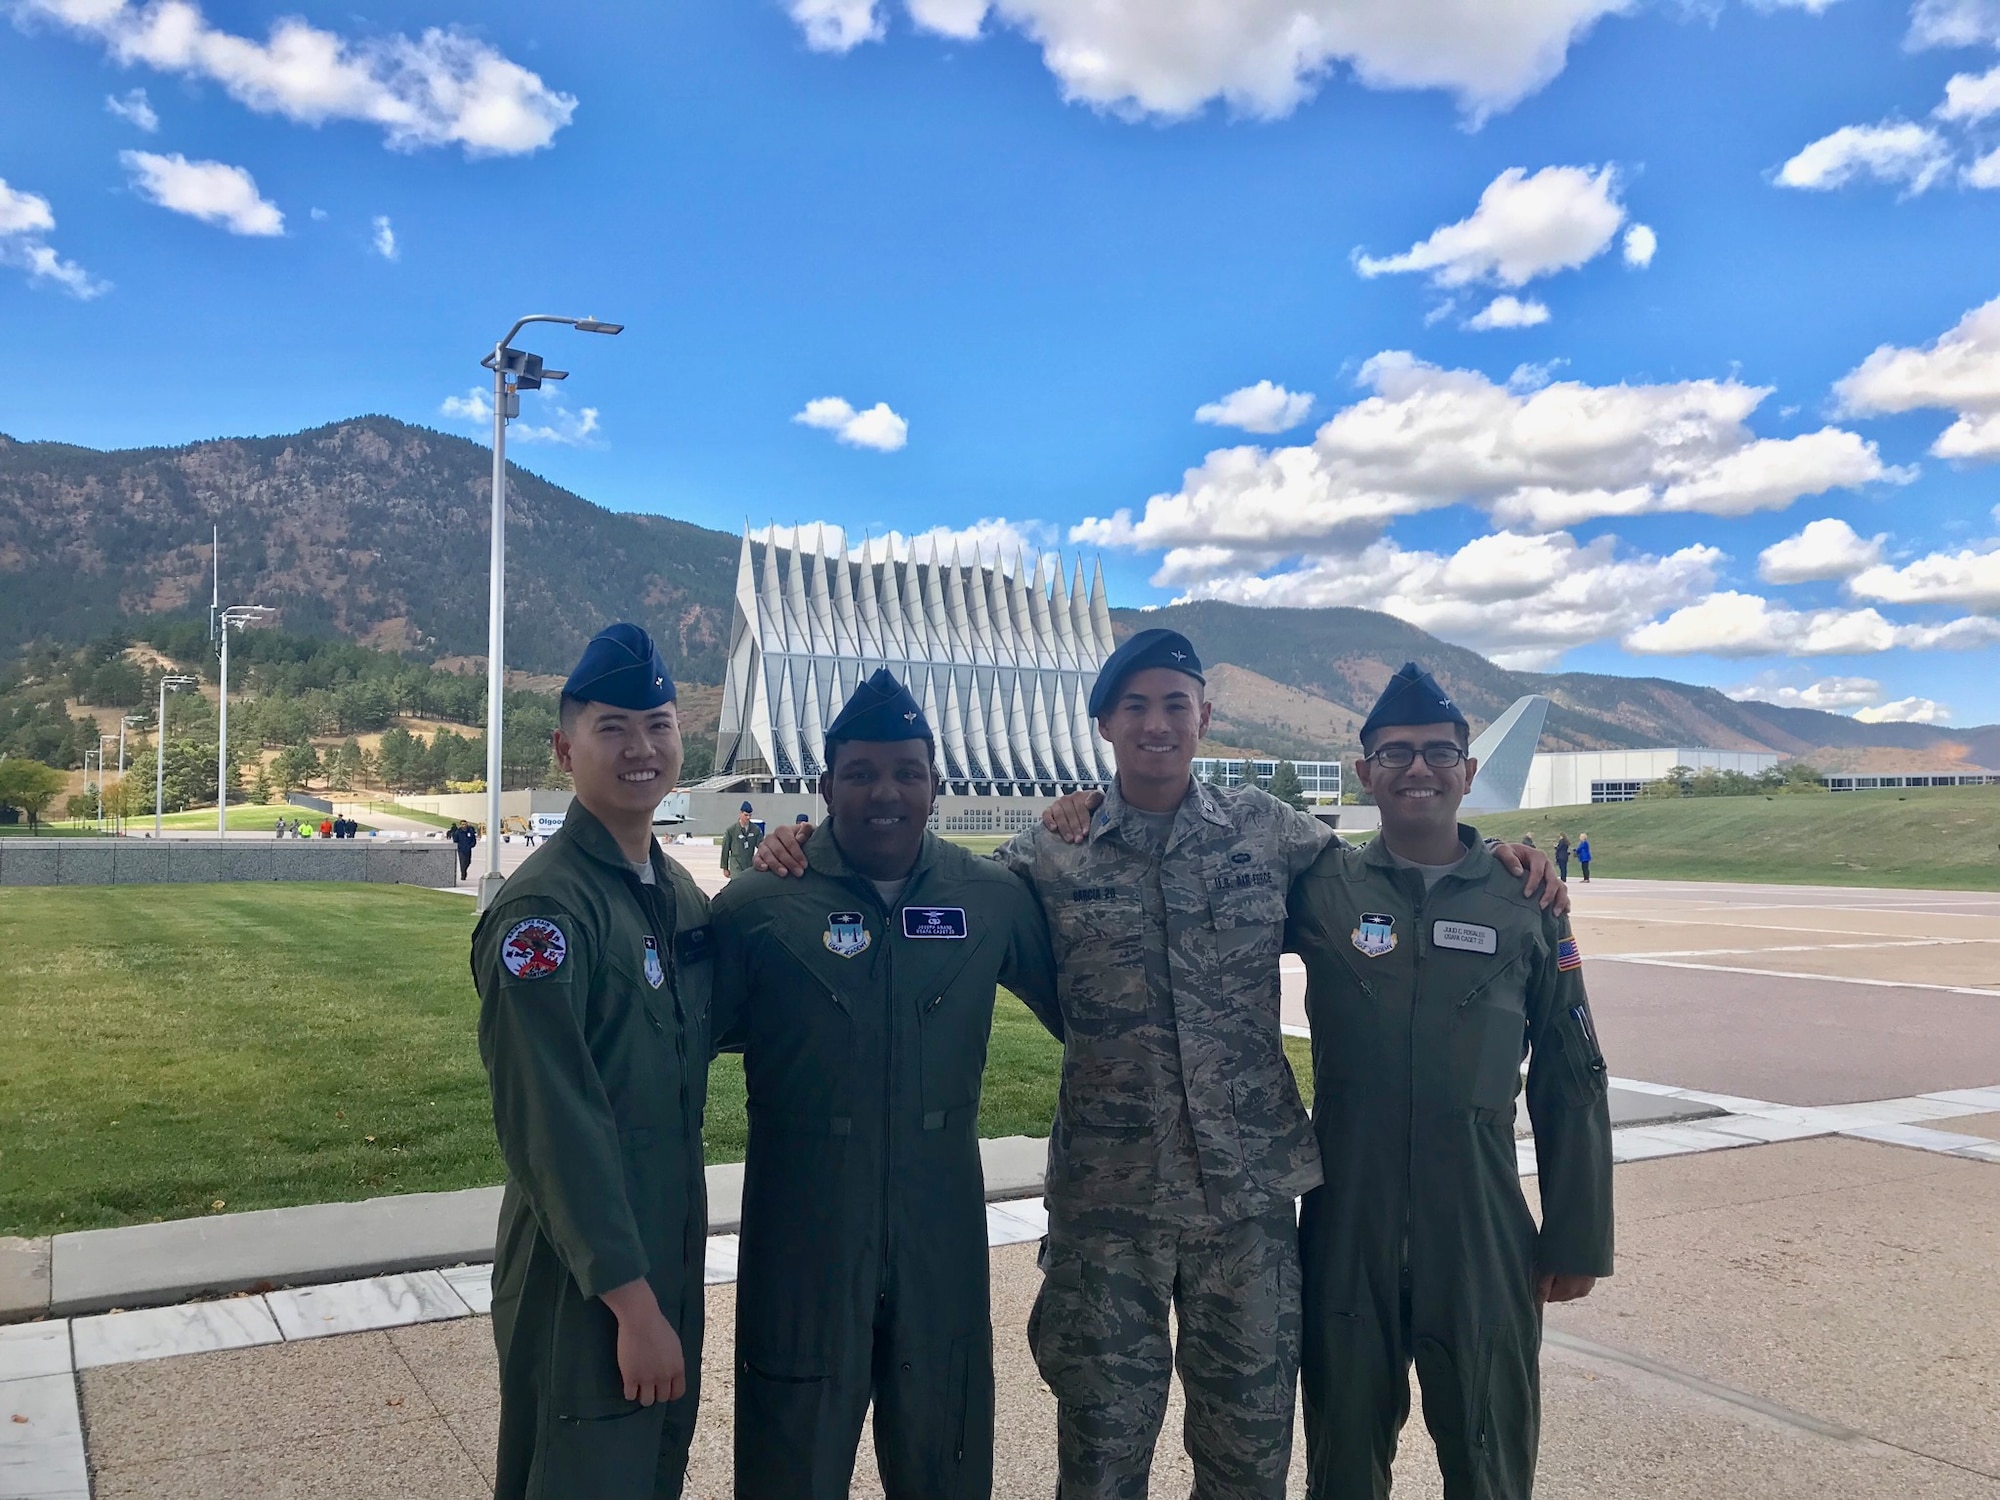 Members of the cadet Air Force Academy Energy Action Team pose at the U.S. Air Force Academy, Colo., October 04, 2019.